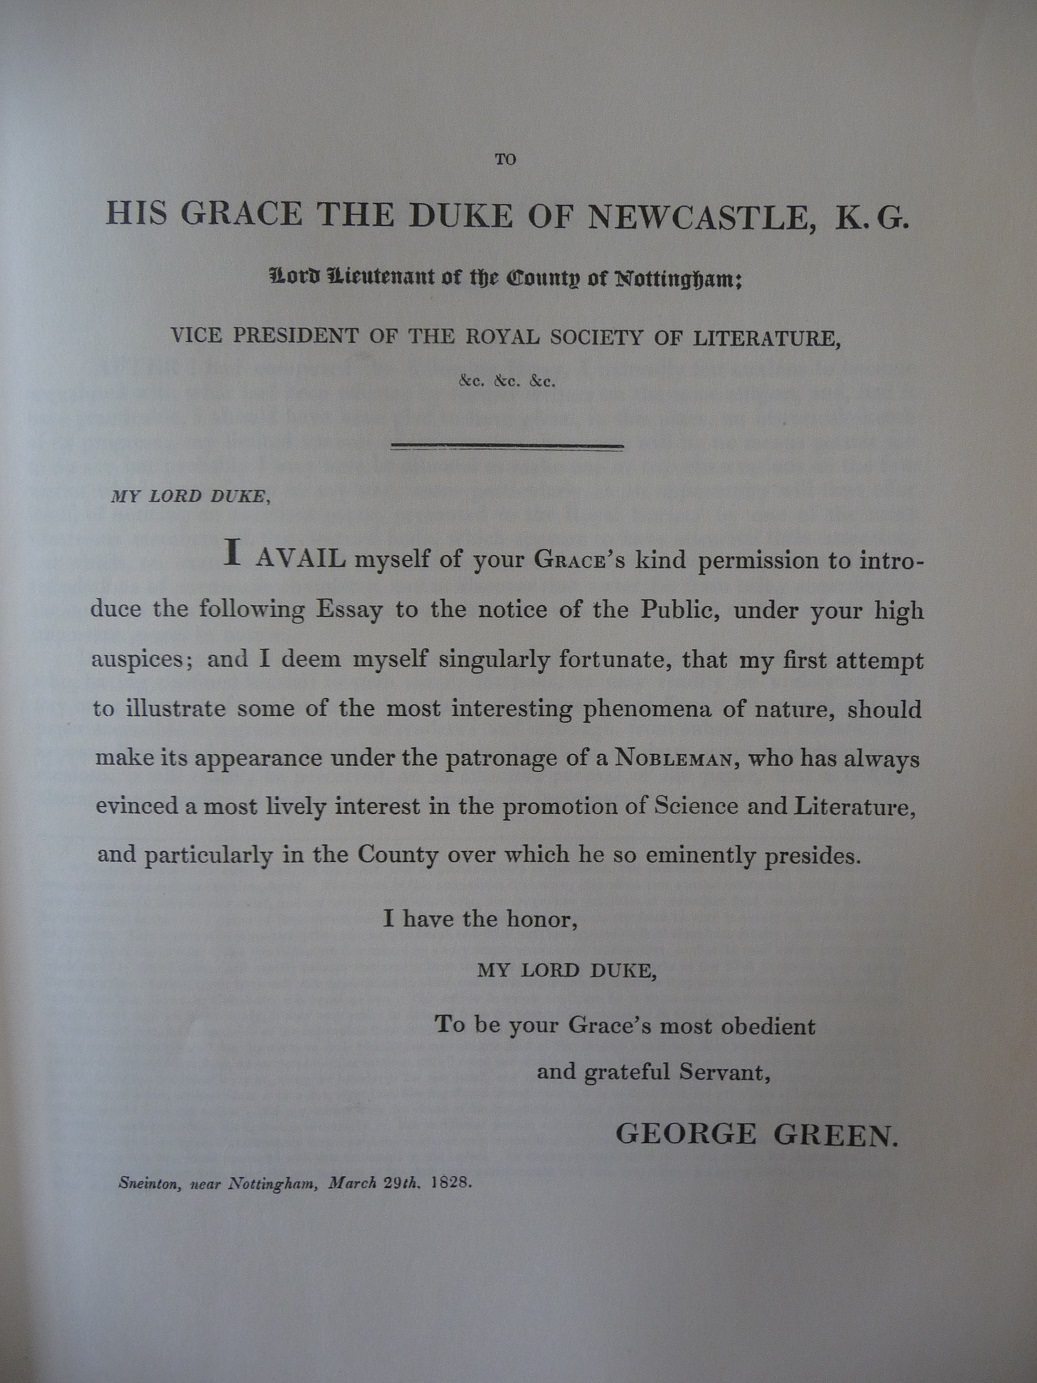 George Green's dedication to His Grace The Duke or Newcastle. It reads: My Lord Duke, I avail myself of your Grace's kind permission to introduce the following Essay to the notice of the Public, under your high auspices; and I deem myself singularly fortunate, that my first attempt to illustrate some of the most interesting phenomena of nature, should make its appearance under the patronage of a Nobelman, who has always envinced a most lively interest in the promotion of Science and Literature.."